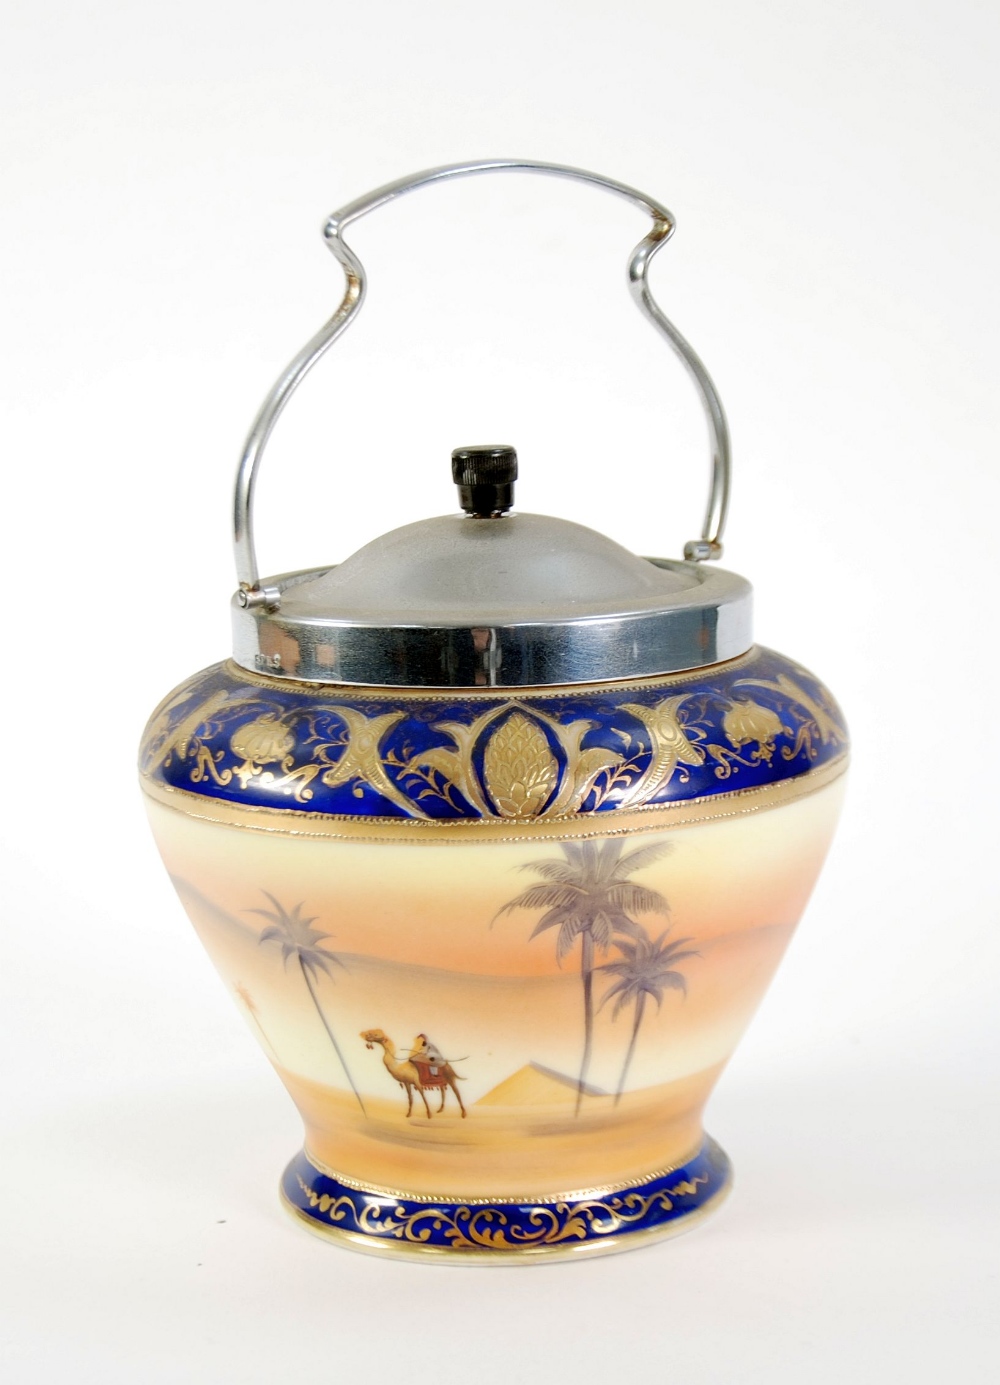 1930s JAPANESE NORITAKE PORCELAIN BISCUIT CONTAINER with electroplated cover and swing handle, the